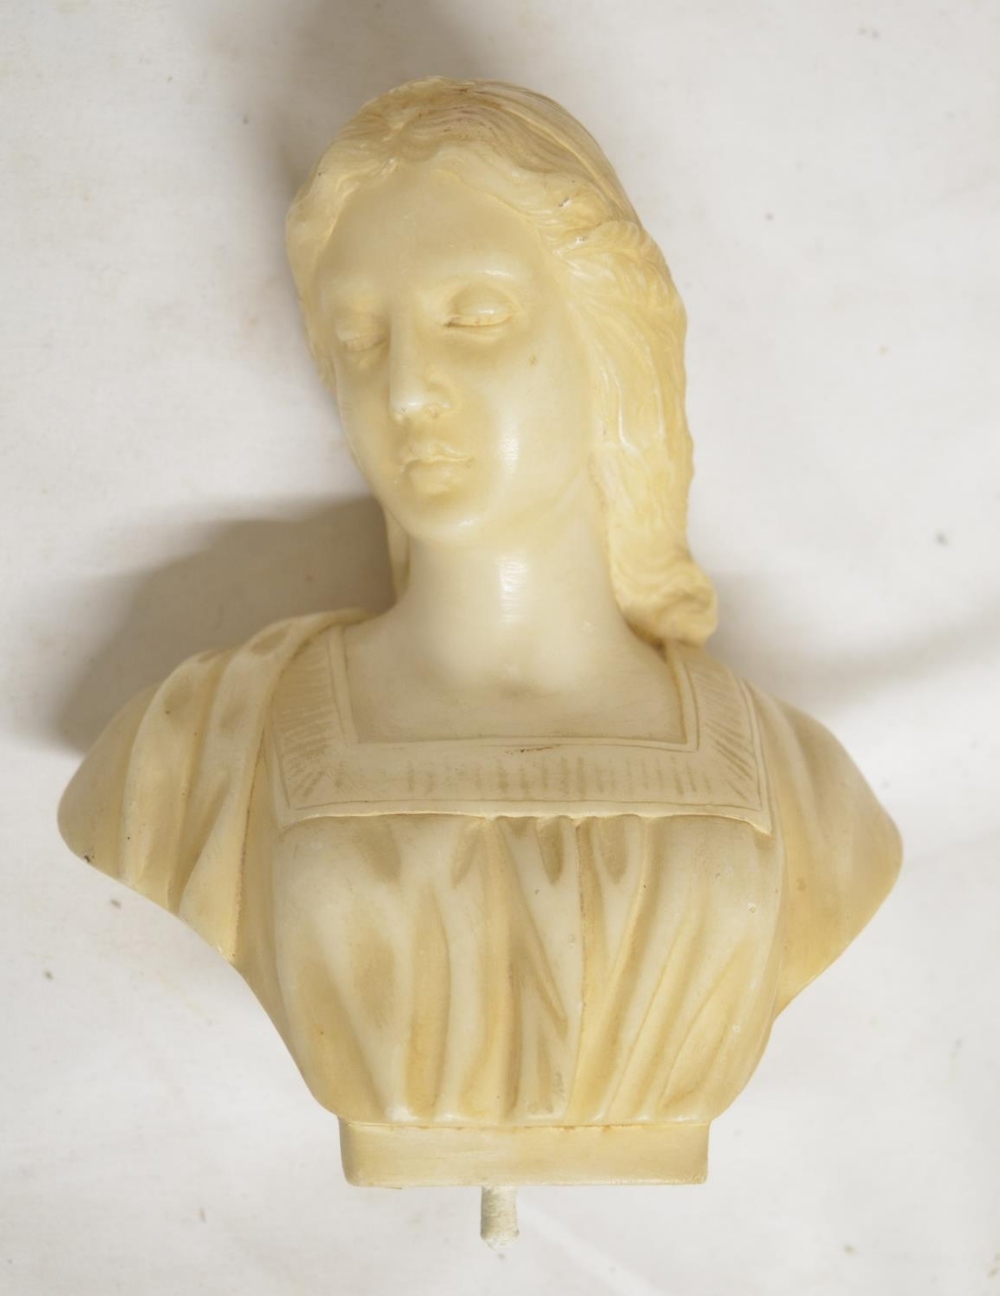 Carved alabaster female bust, marked J Raphael to rear, with base mounting peg. H18cm (Victor Brox